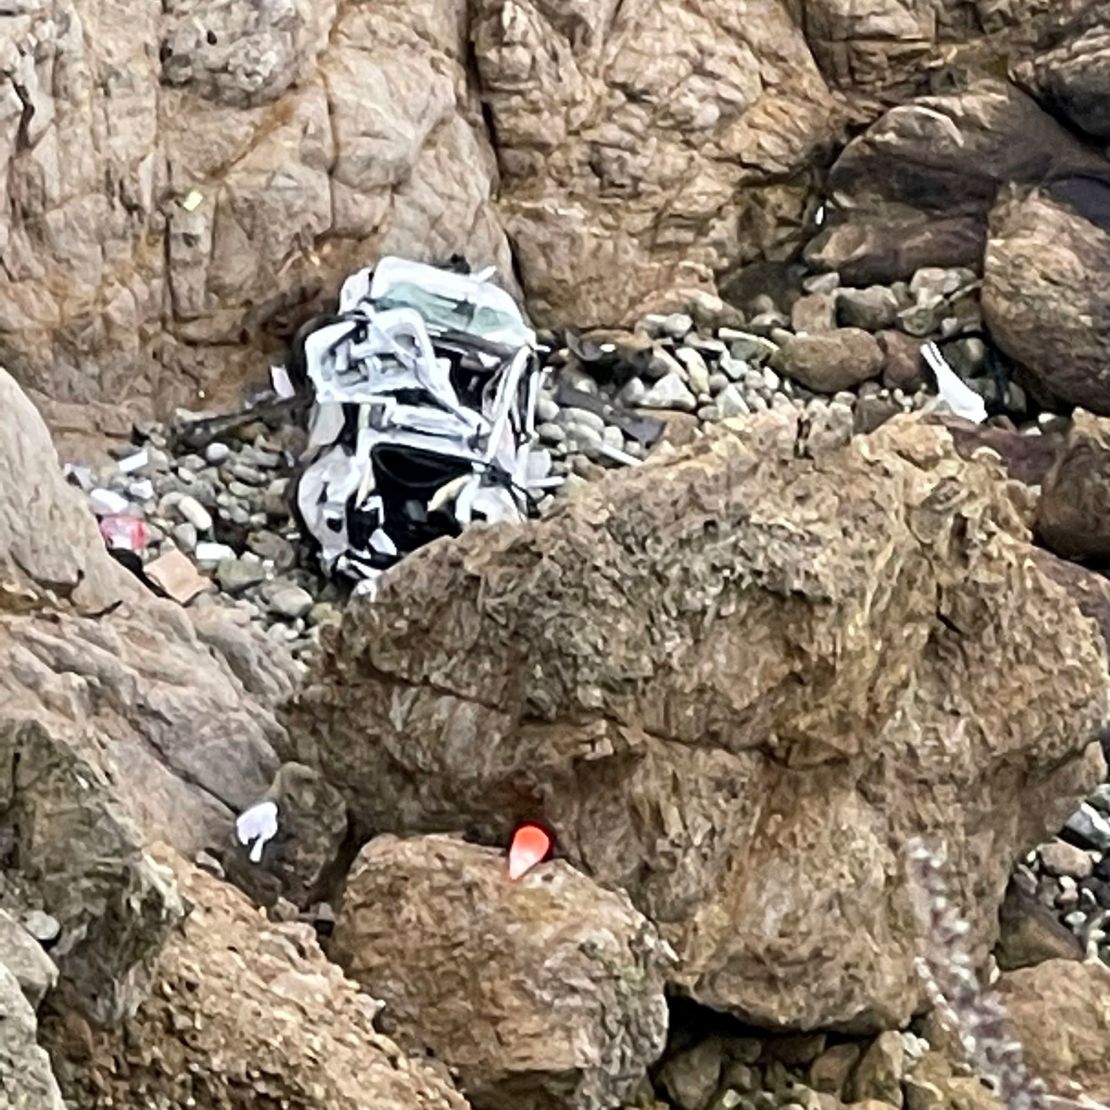 This image from the San Mateo County Sheriff's Office shows the Tesla on a rocky beach below the cliffs, in an area called Devil's Slide. 